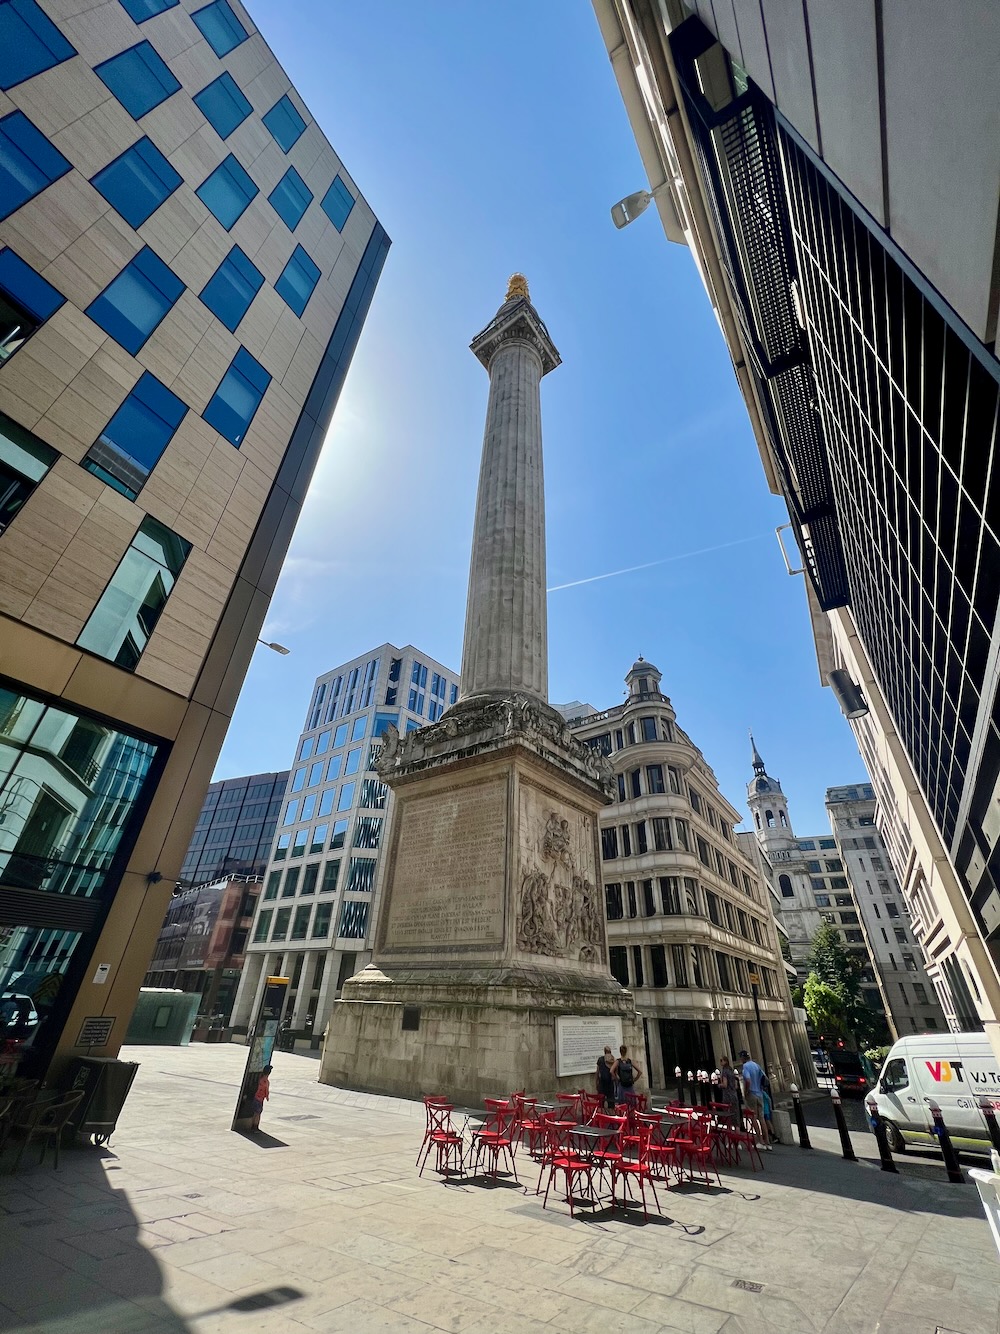 Monument to the Great Fire of London. Photo Credit: © Ursula Petula Barzey.